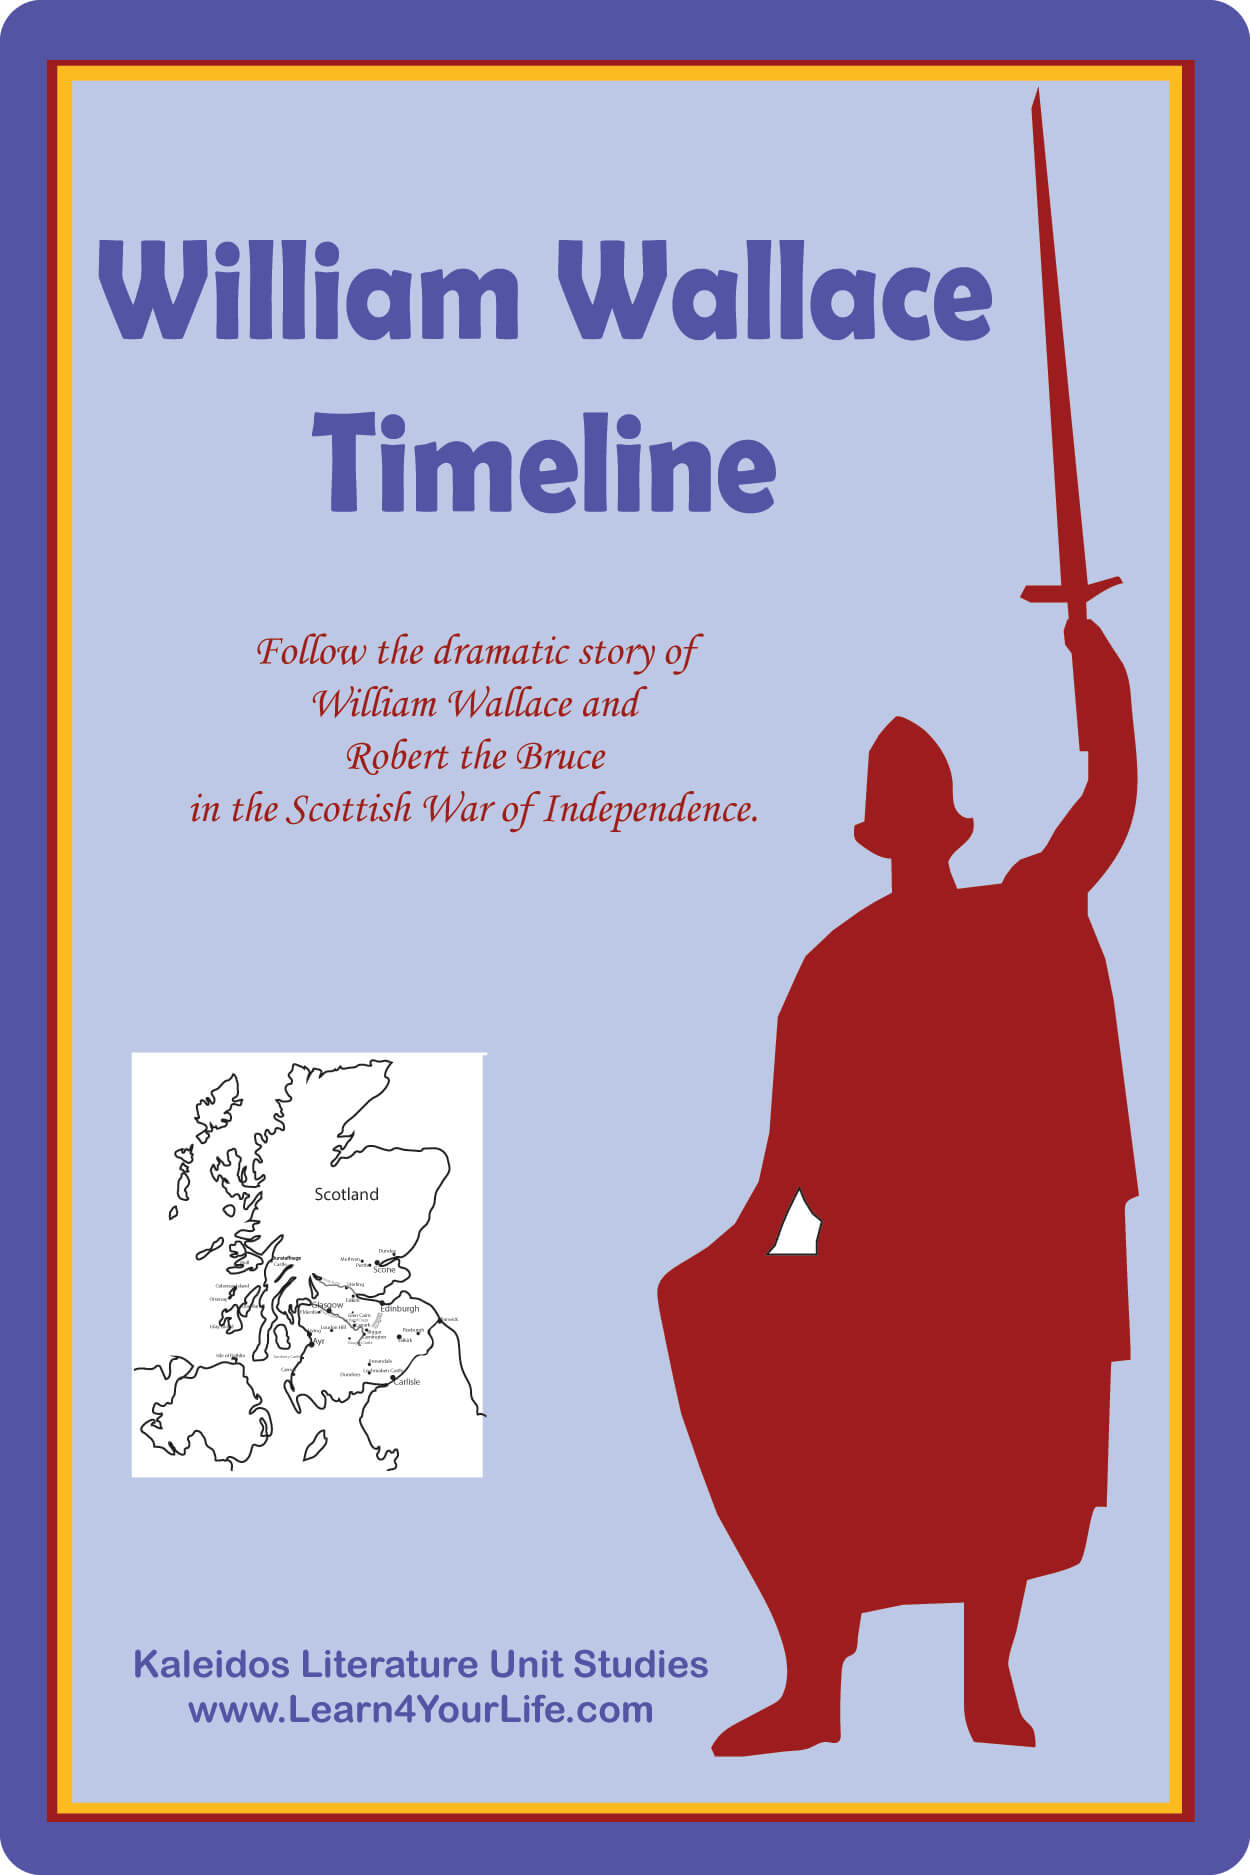 William Wallace Timeline